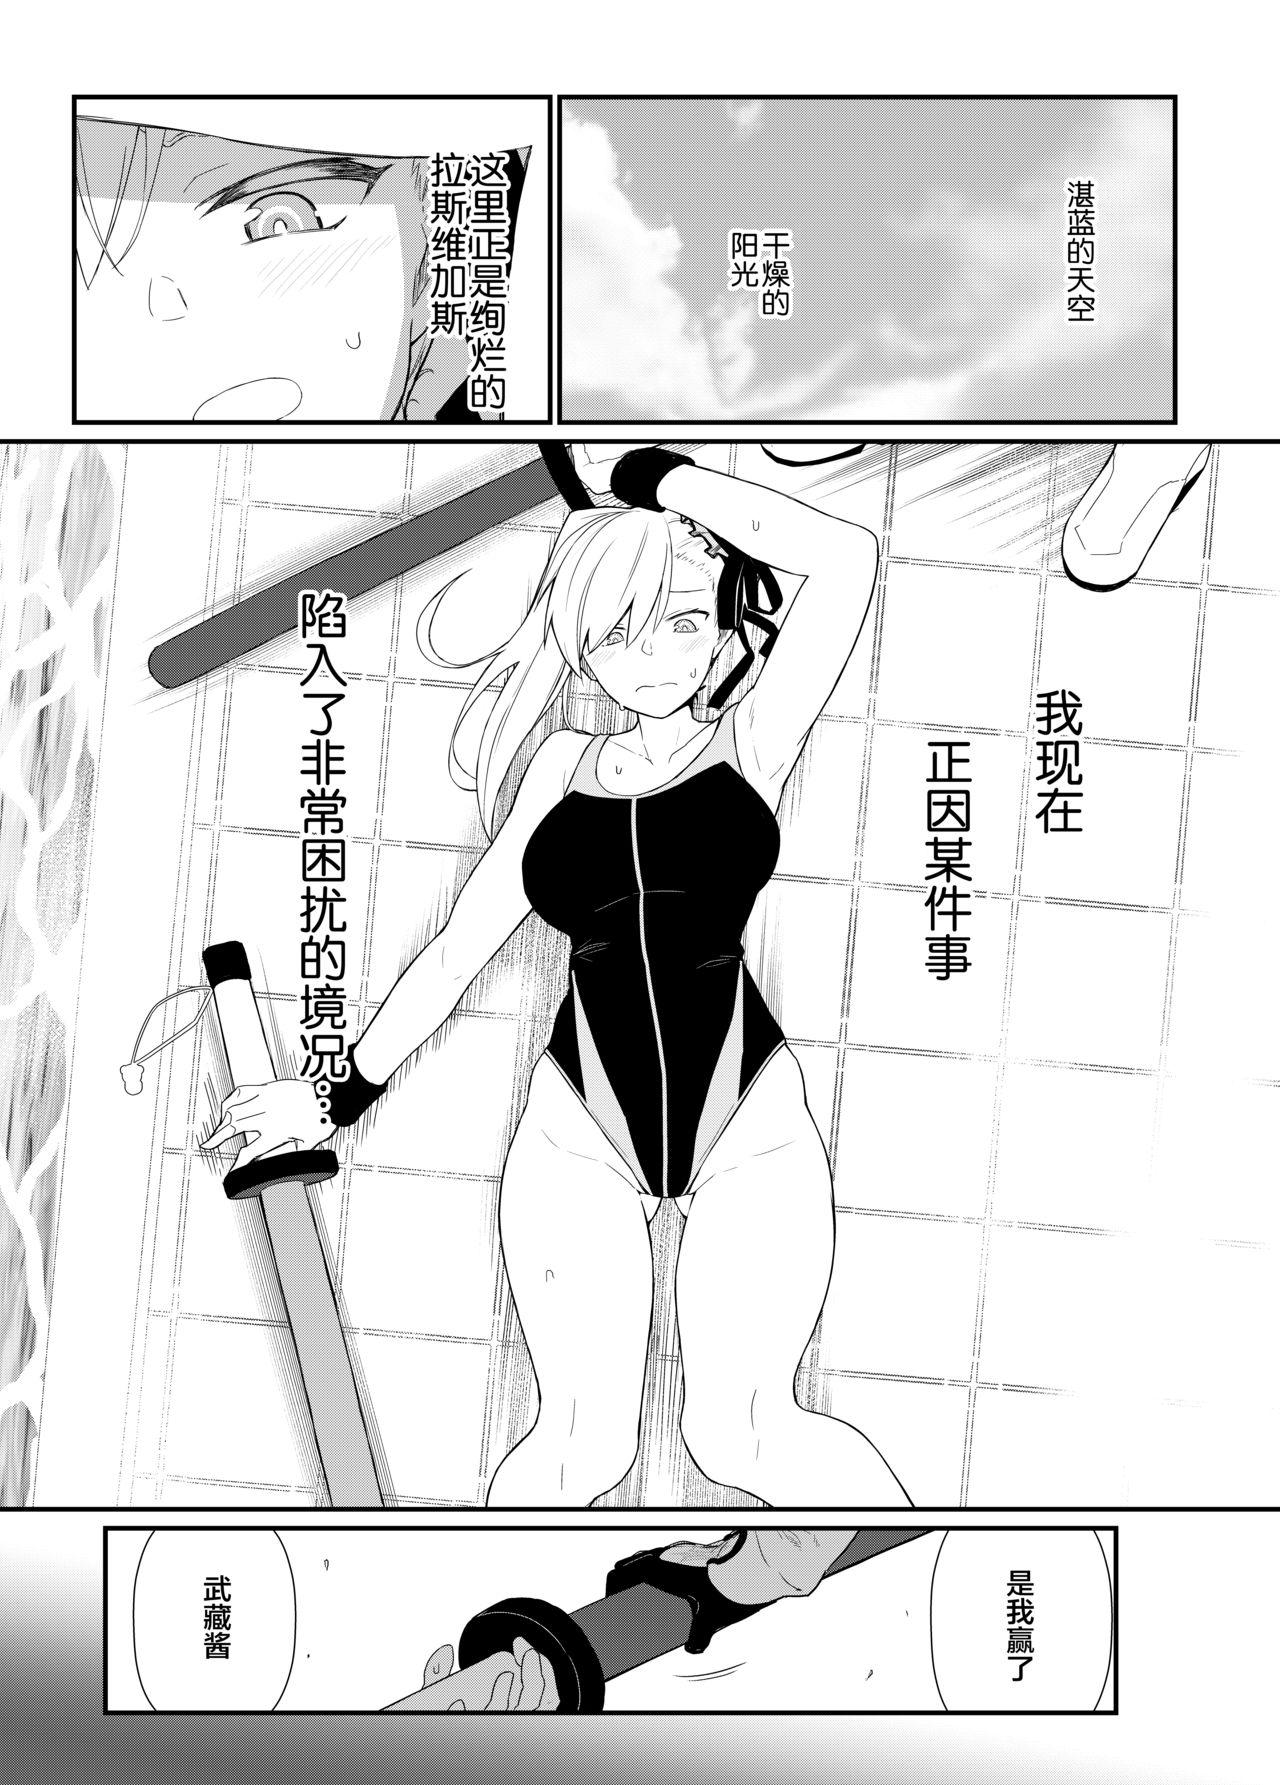 Free Rough Porn GIRLFriend's 18 - Fate grand order Ginger - Page 3